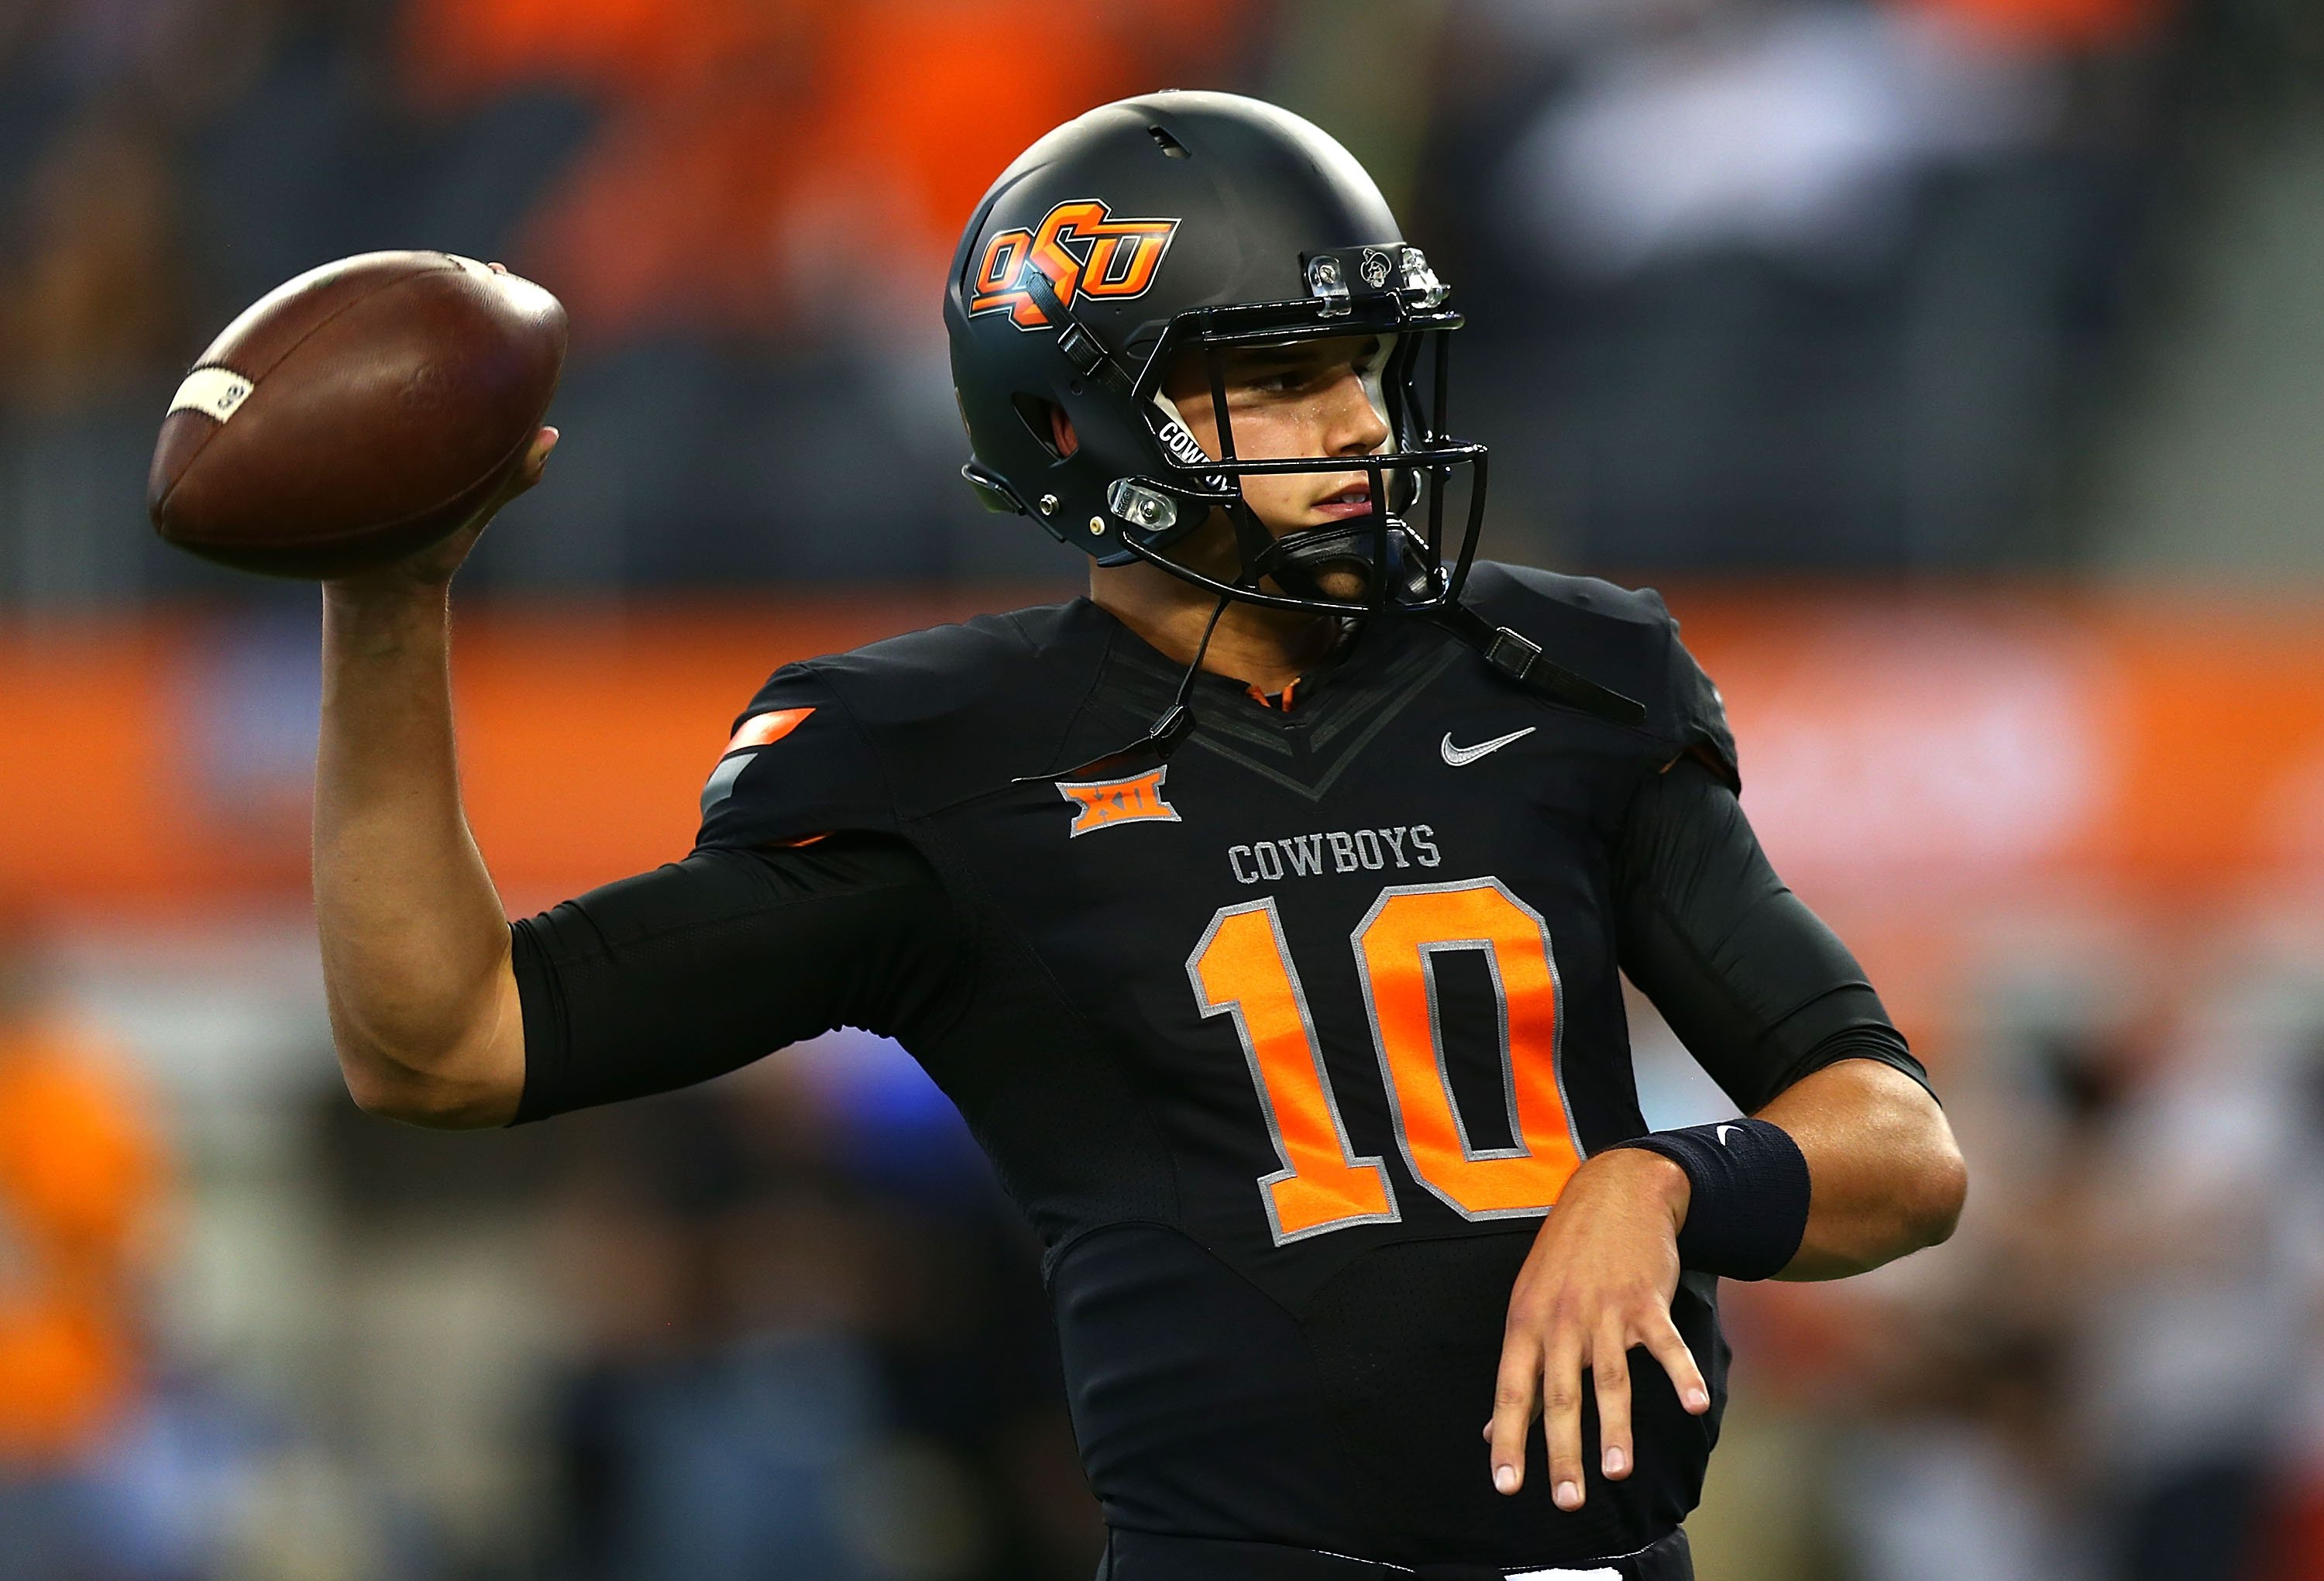 Mason Rudolph could see the field on Saturday. (USATSI)